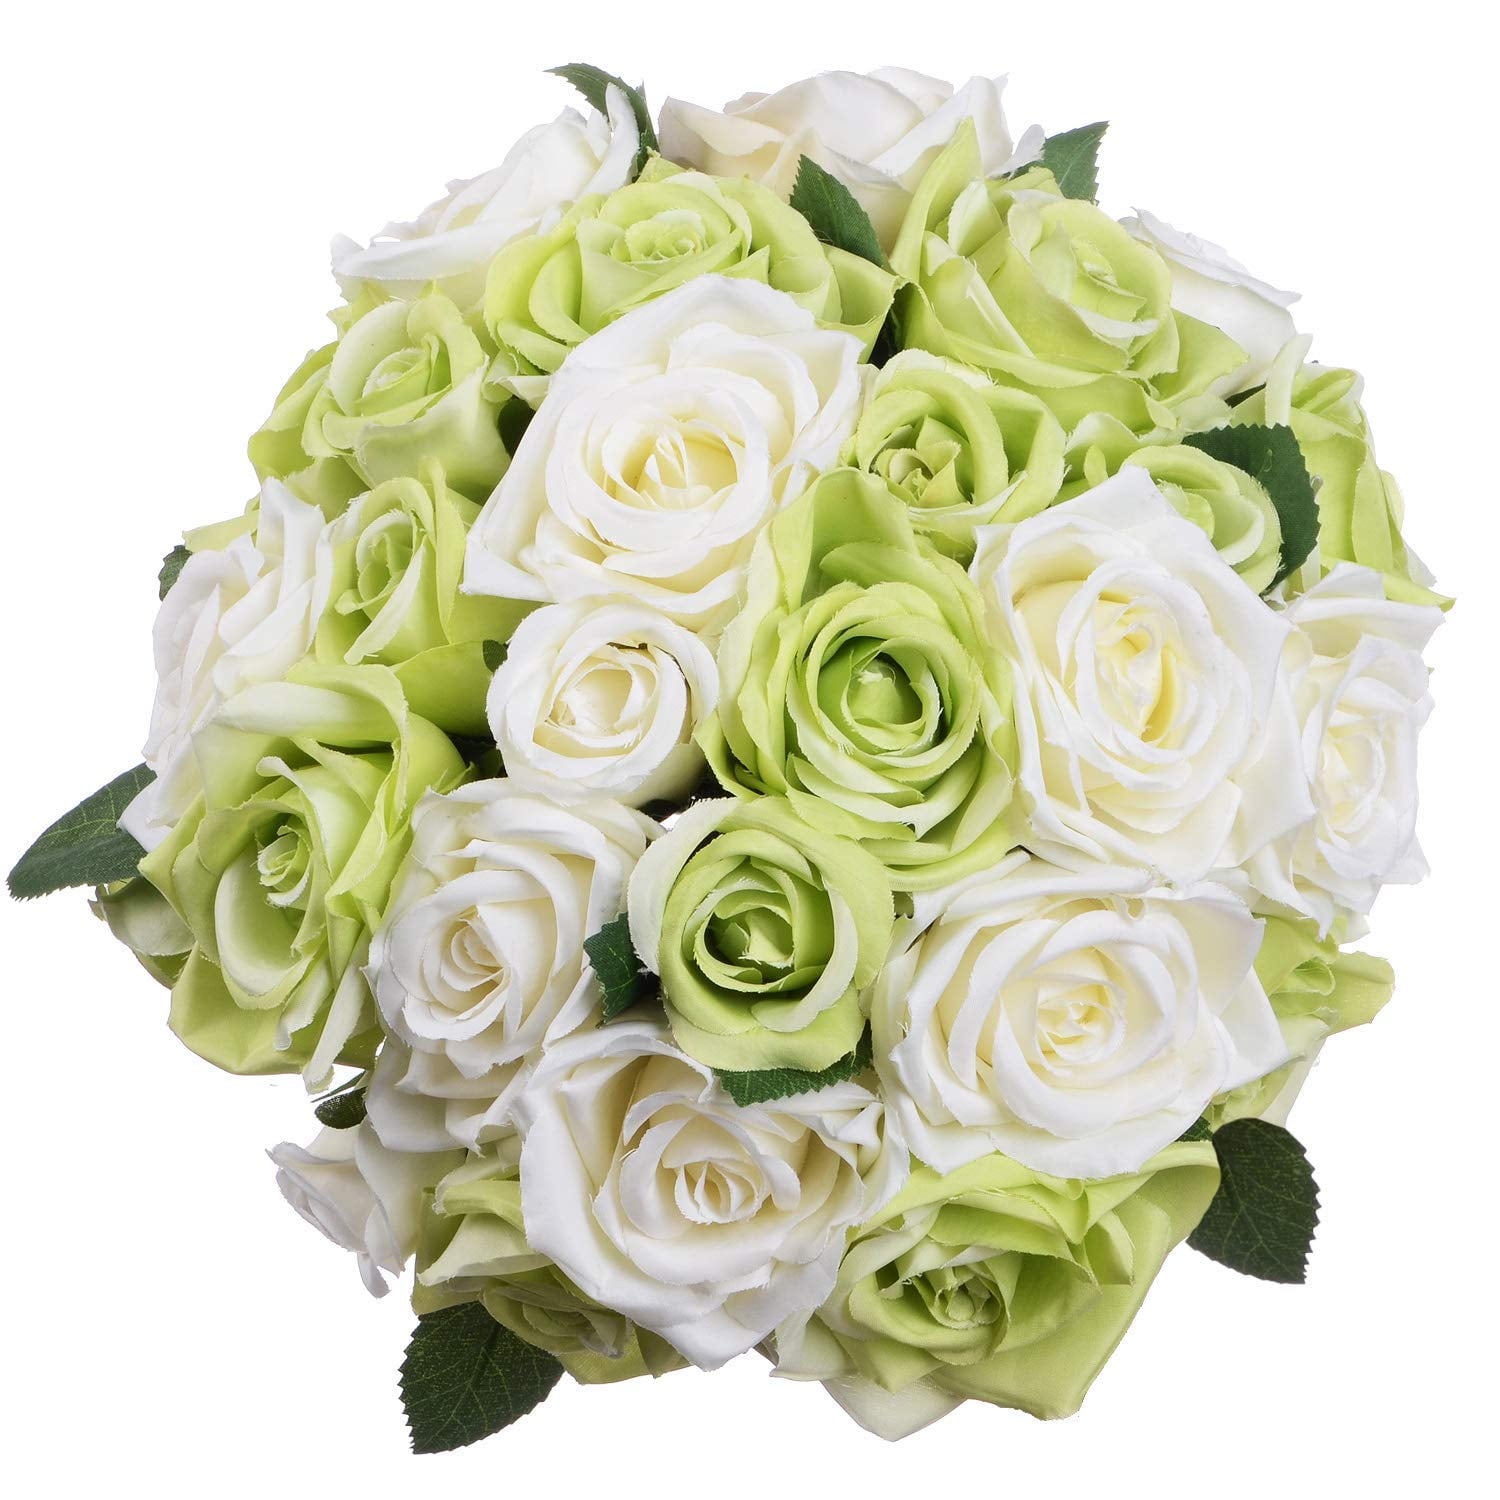 Details about   Artificial Rose Flower Bouquet Fake Silk Flowers for Home Wedding Party Decor 